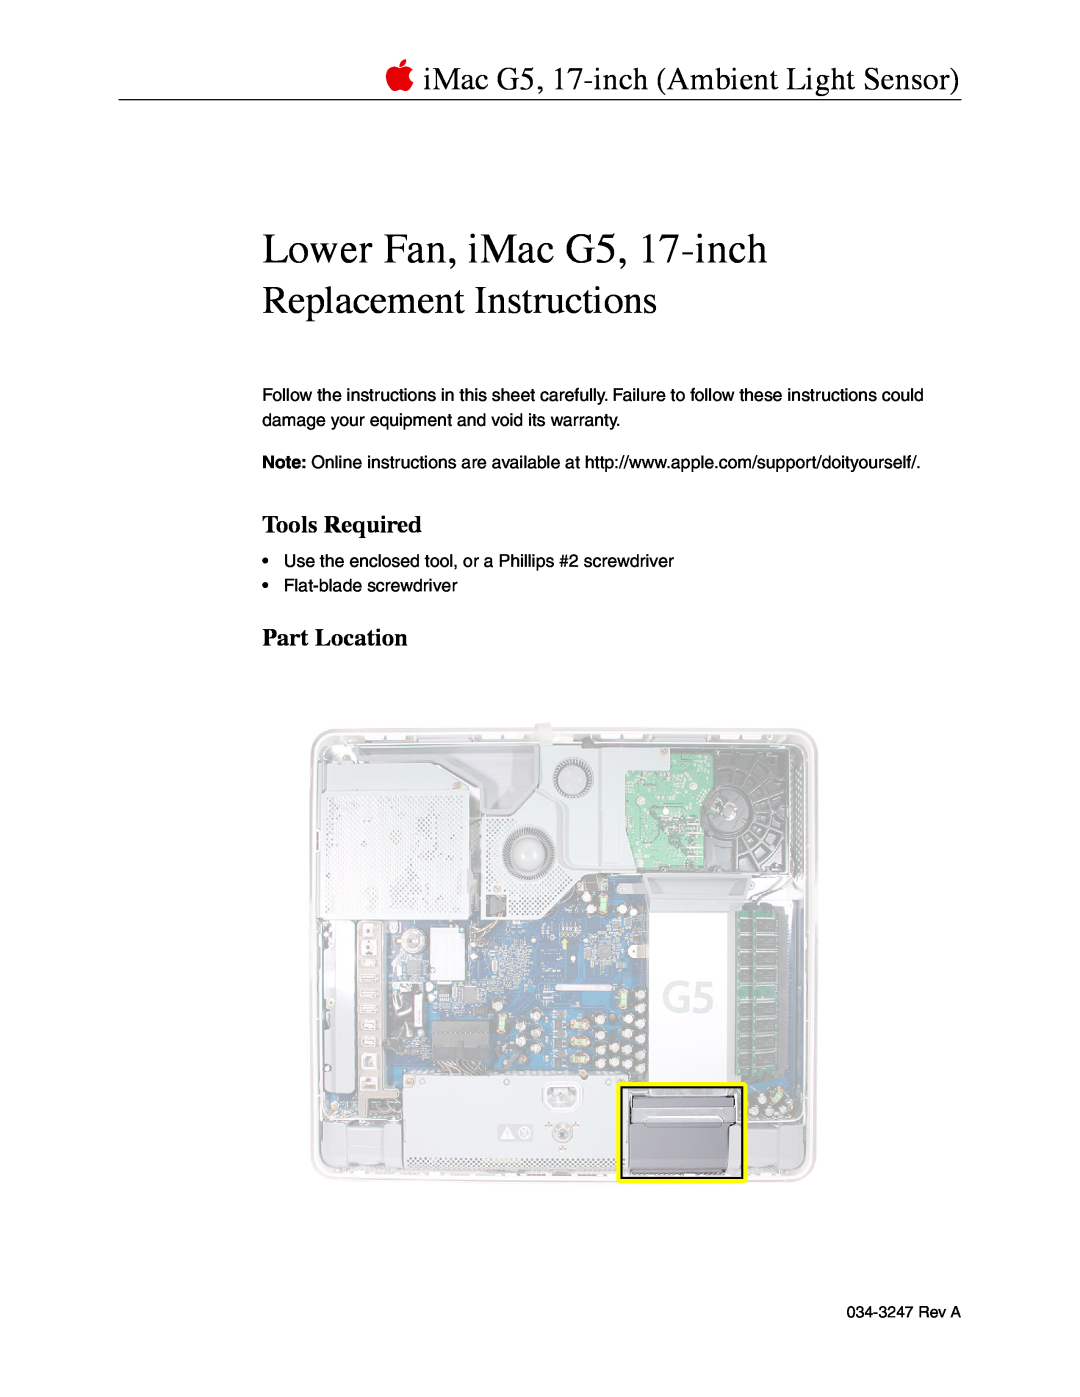 Apple G5 warranty Tools Required, Part Location, Use the enclosed tool, or a Phillips #2 screwdriver, Rev A 